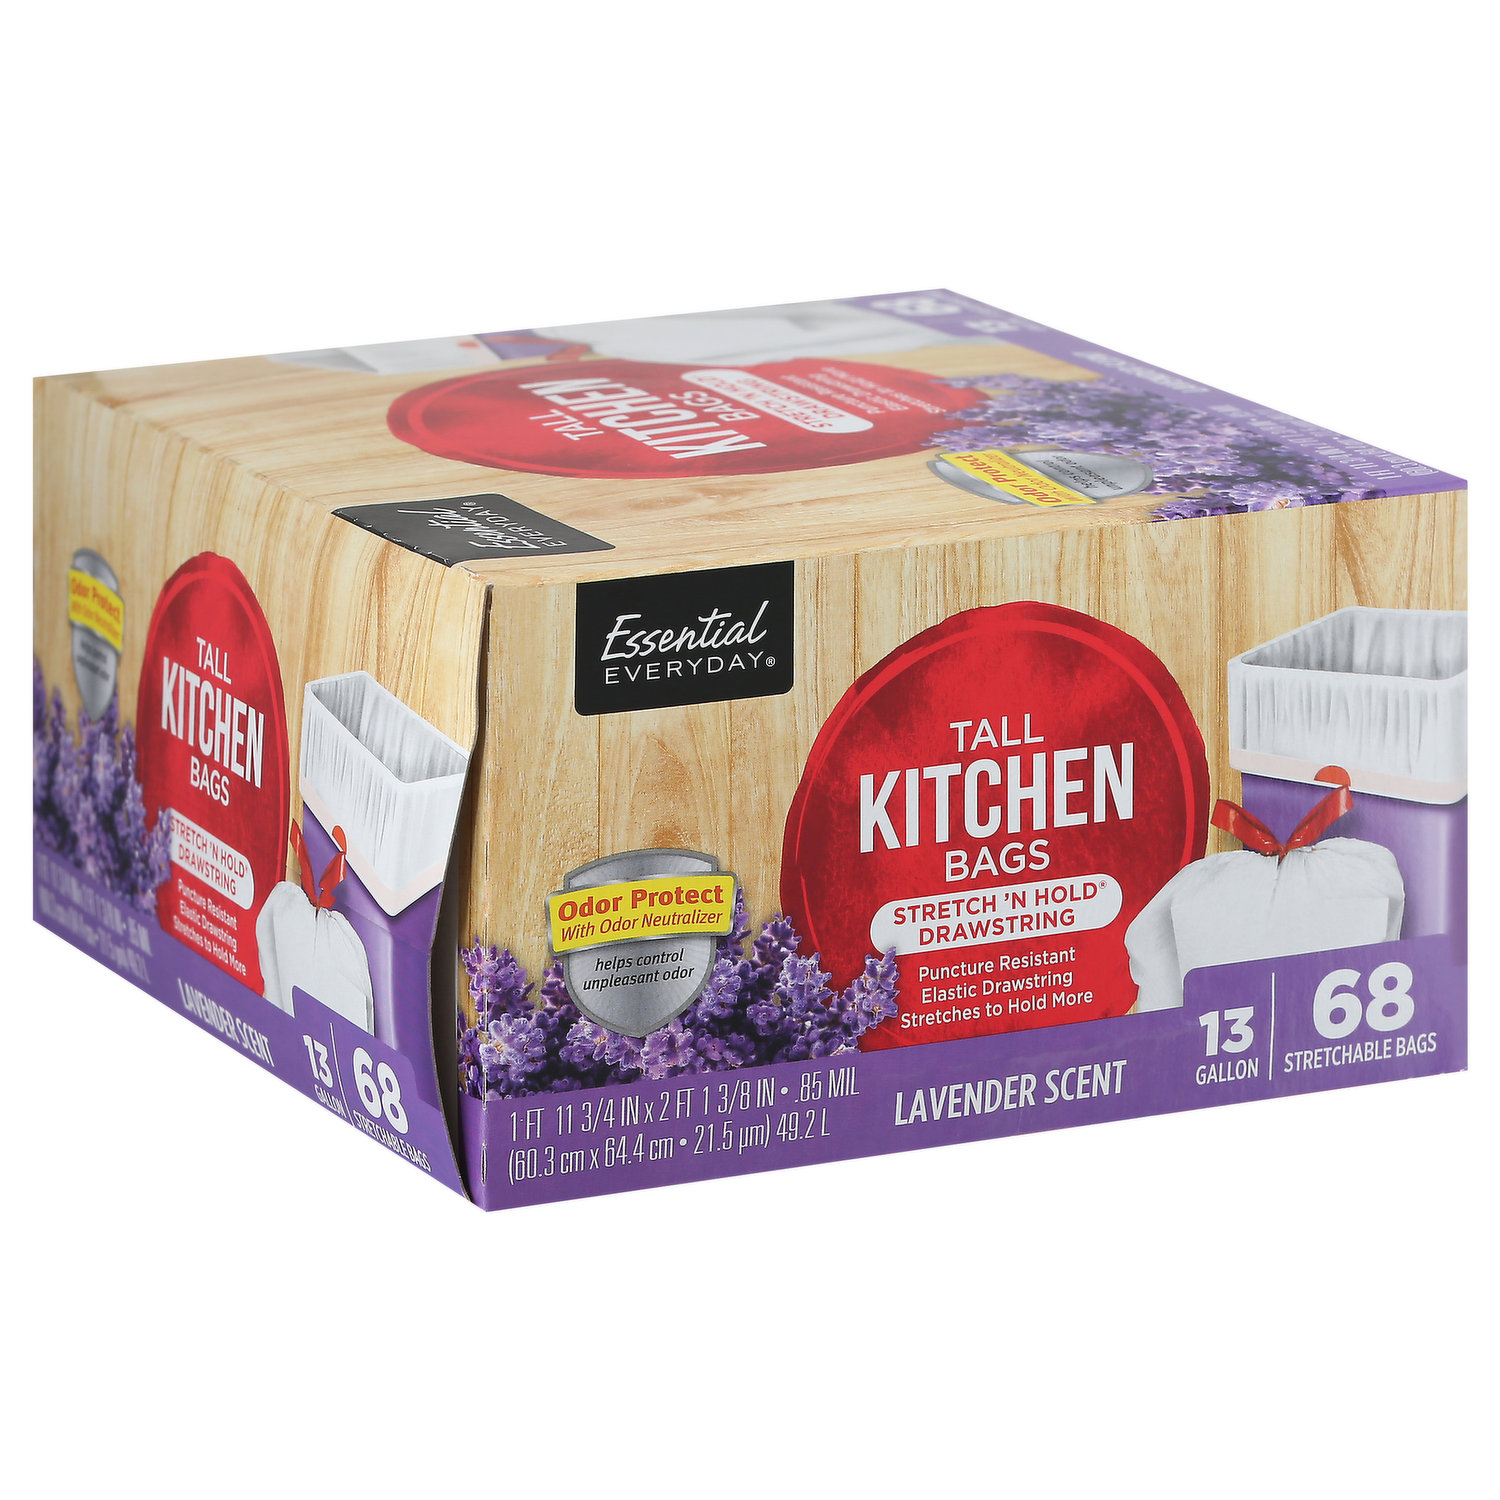 Save on Nature's Promise Tall Kitchen Bags with Drawstring 13